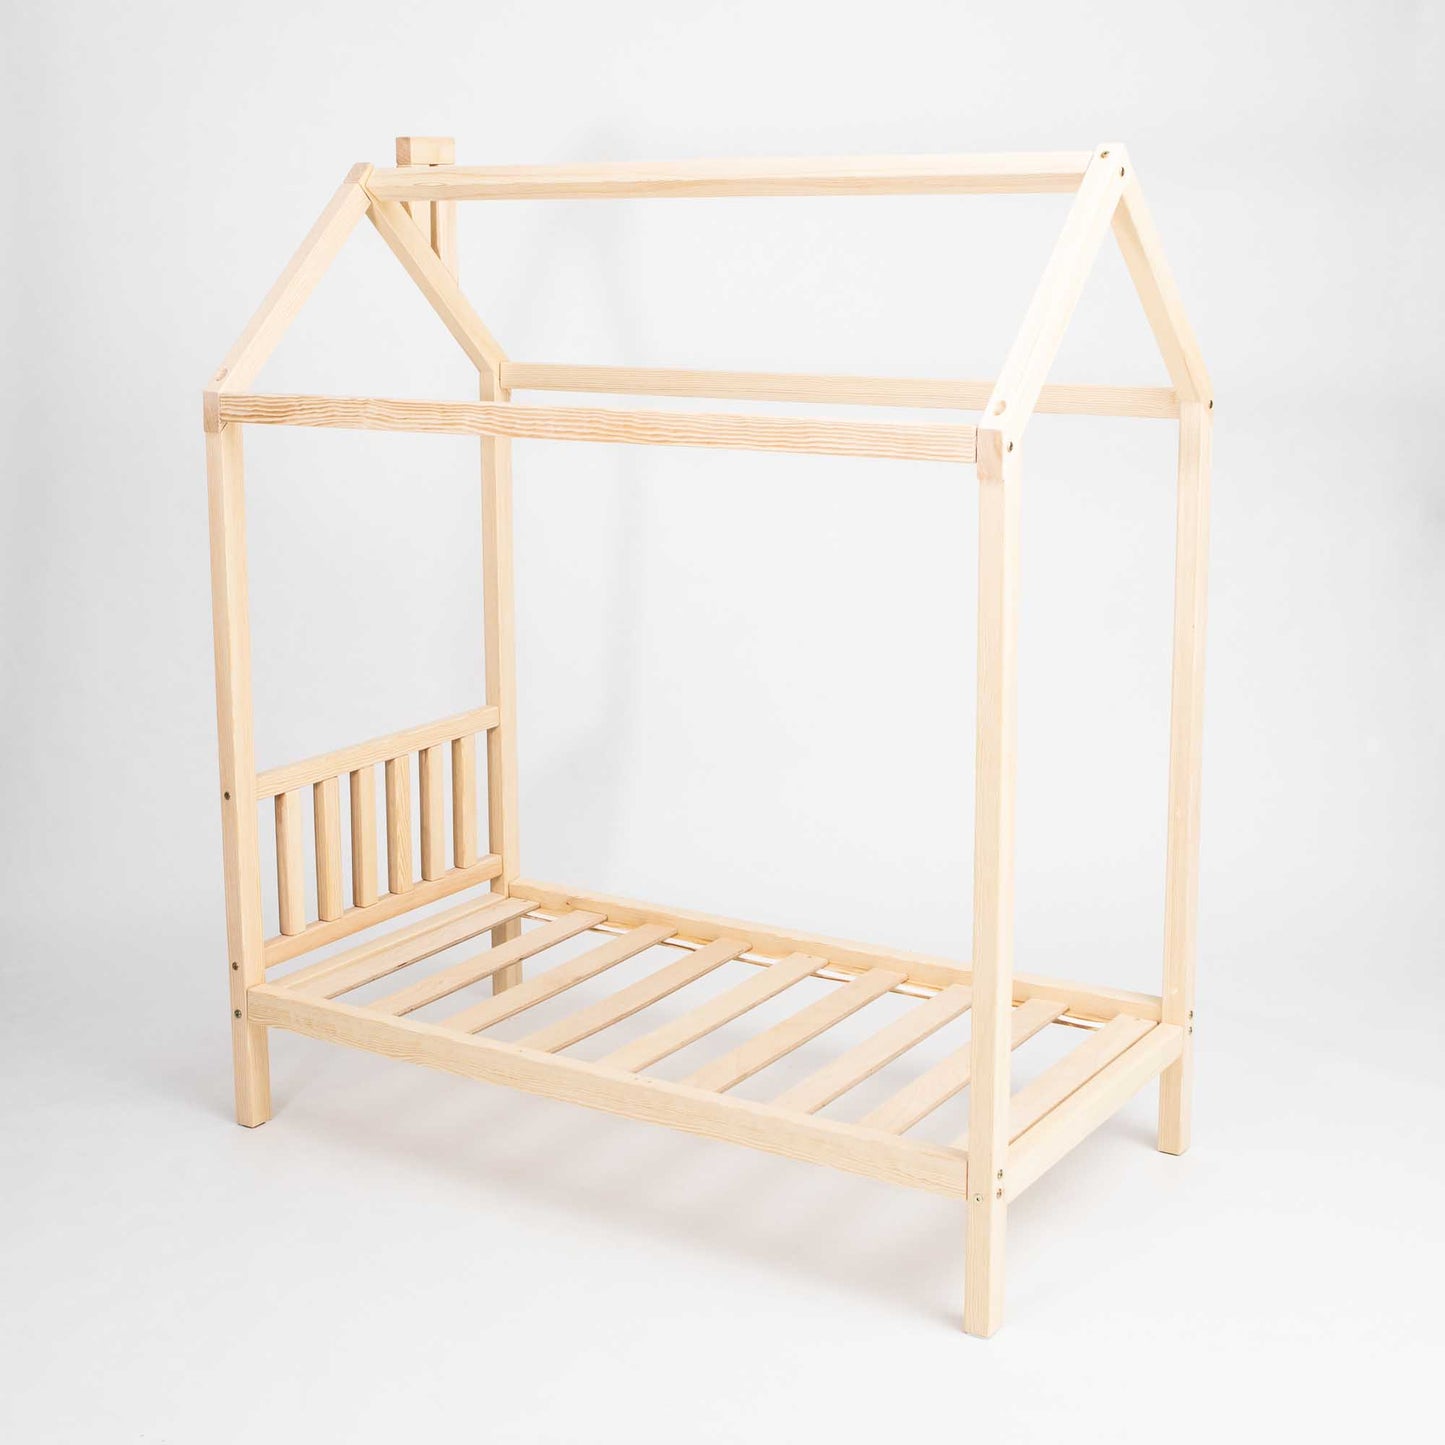 A toddlers' house bed on legs with a headboard and slats.